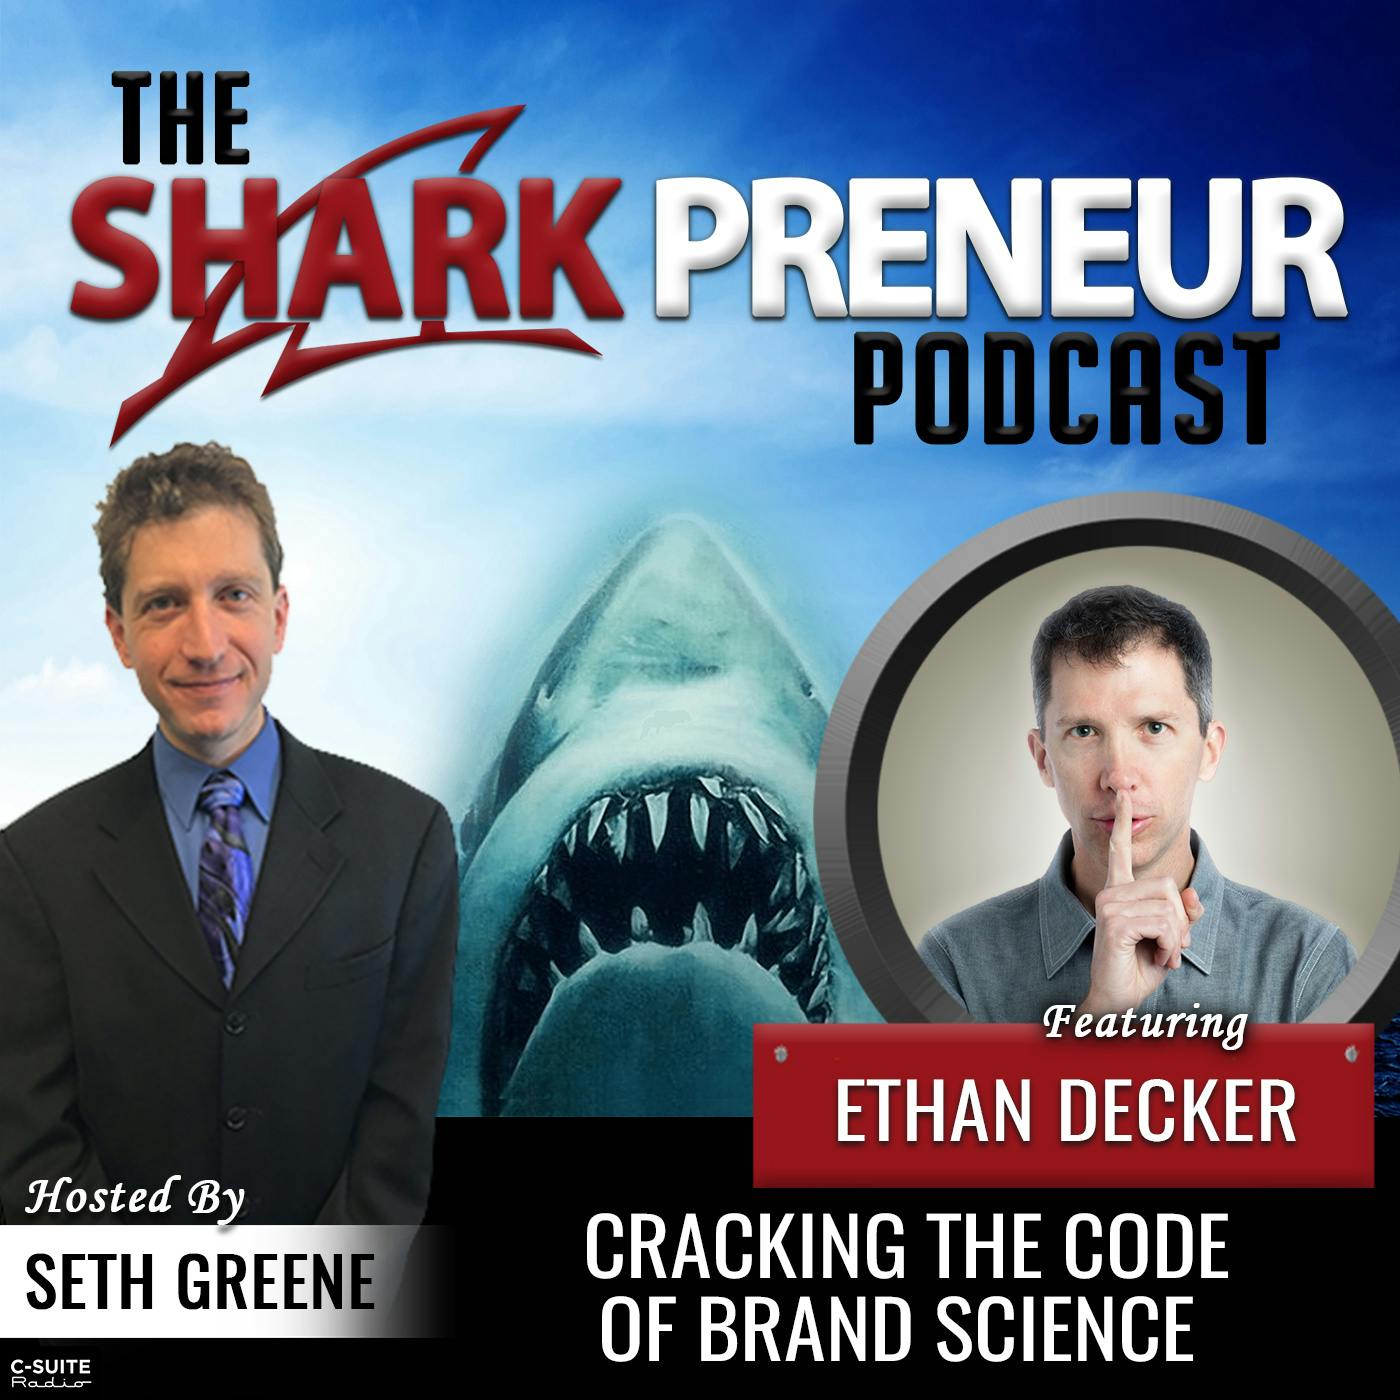 https://megaphone.imgix.net/podcasts/8b595196-98c3-11ee-921f-27a84dc9e9fe/image/SharkPreneur_Podcast_Art_BEST_2020_ONLY_Seth_with_TITLE_Ethan_Decker.jpg?ixlib=rails-4.3.1&max-w=3000&max-h=3000&fit=crop&auto=format,compress